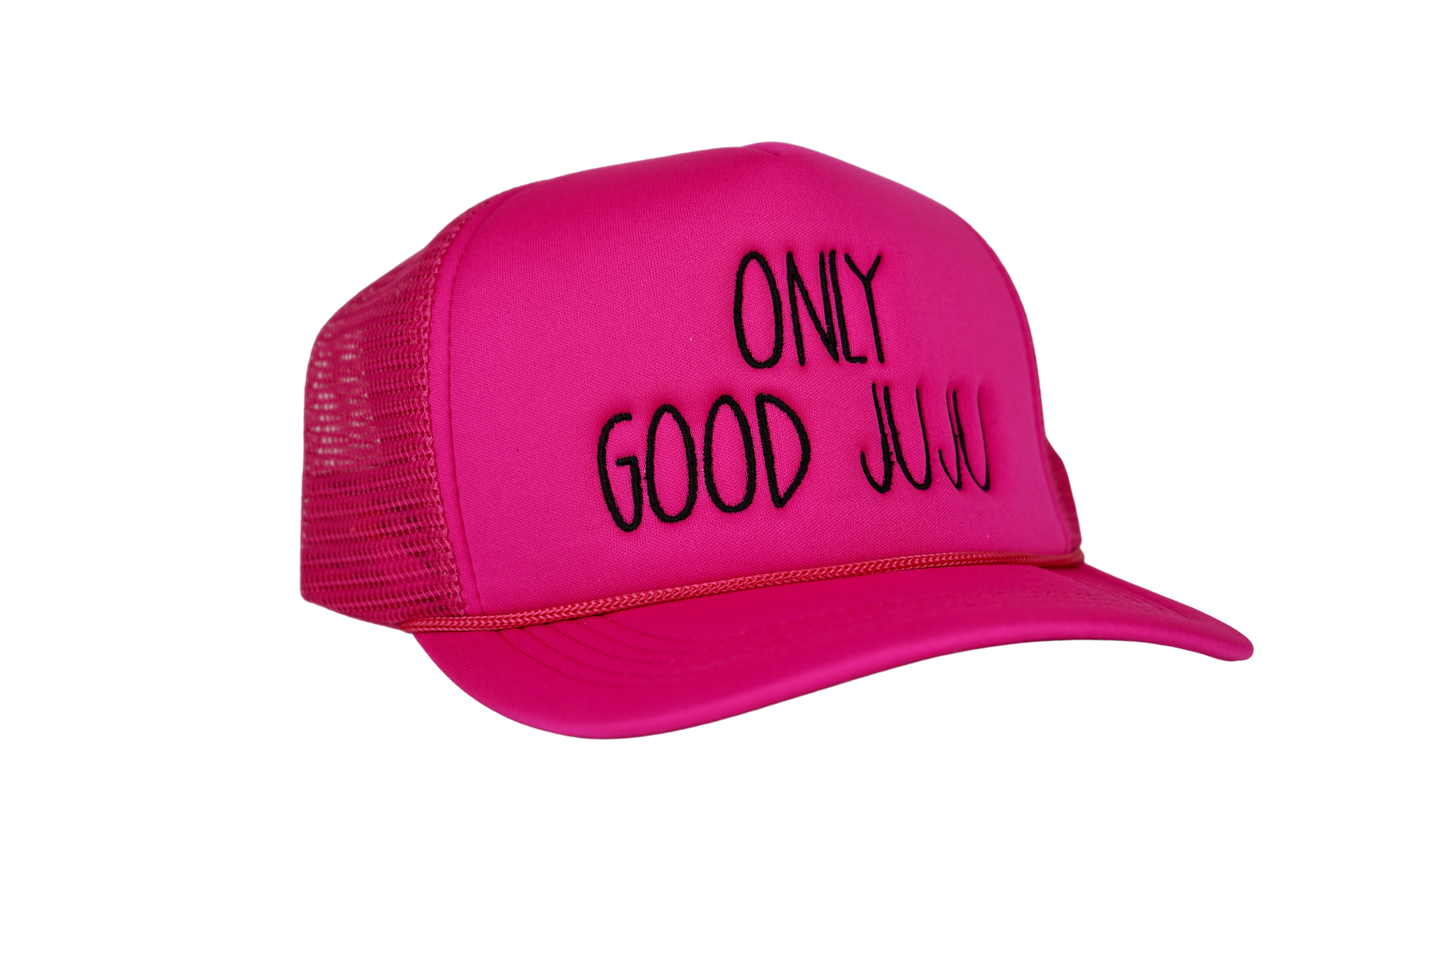 Only Good JuJu Embroidered Trucker Hat - Hot Pink